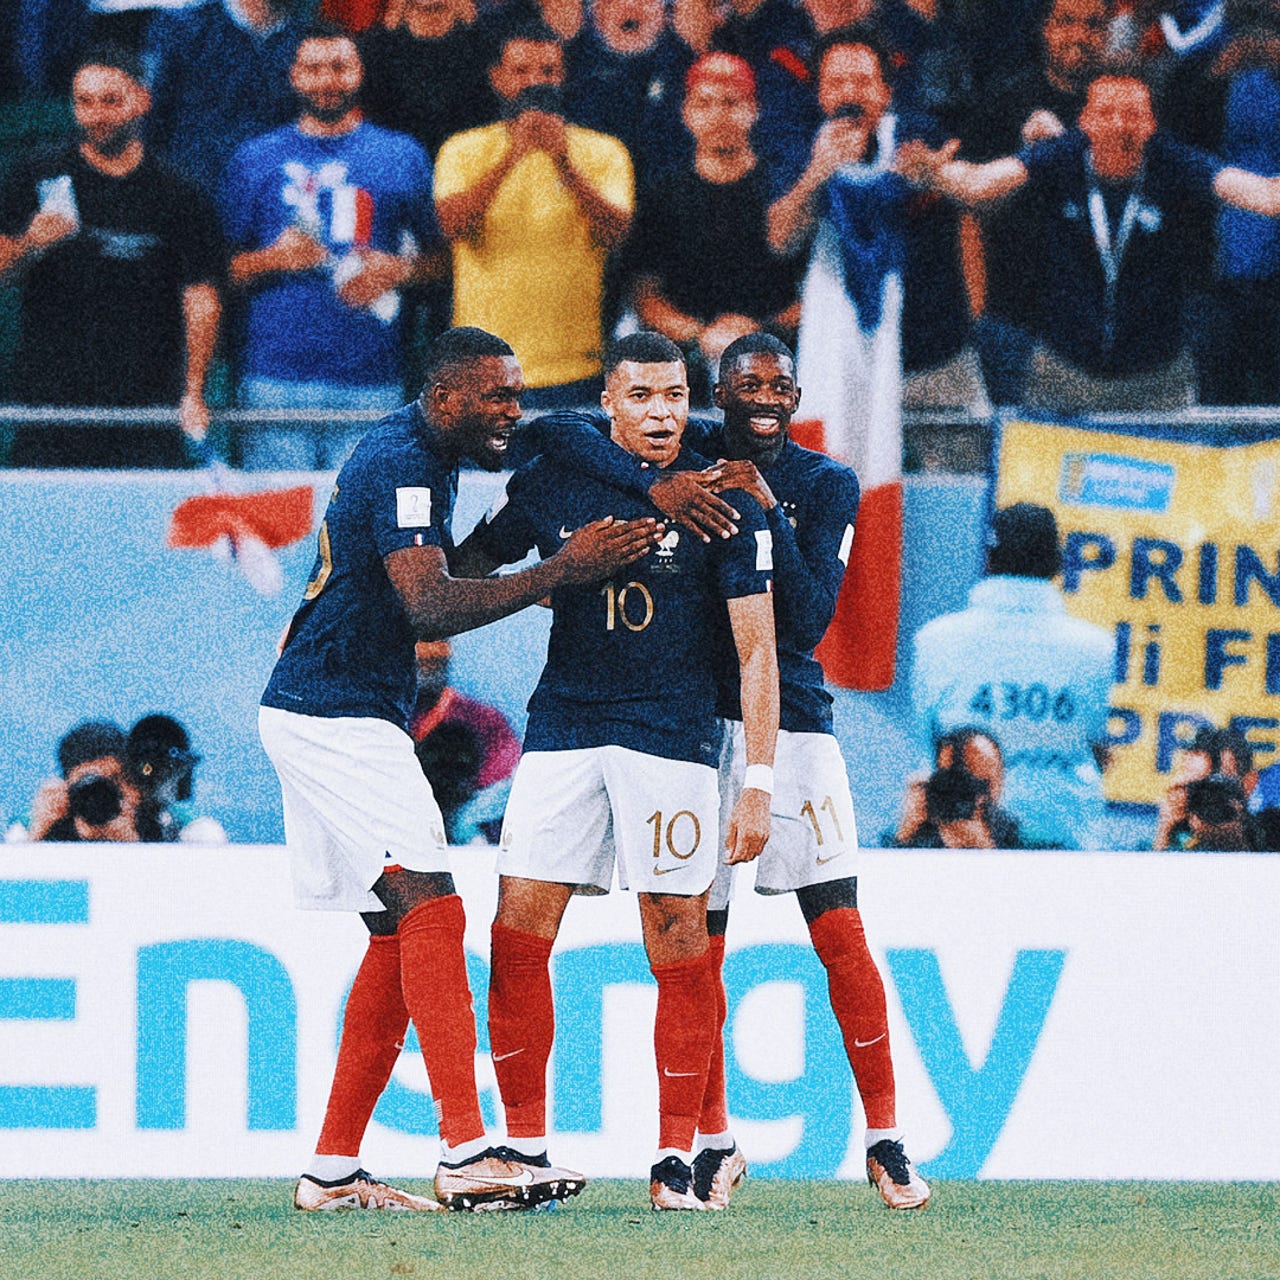 On Top Of The World': France Wins World Cup